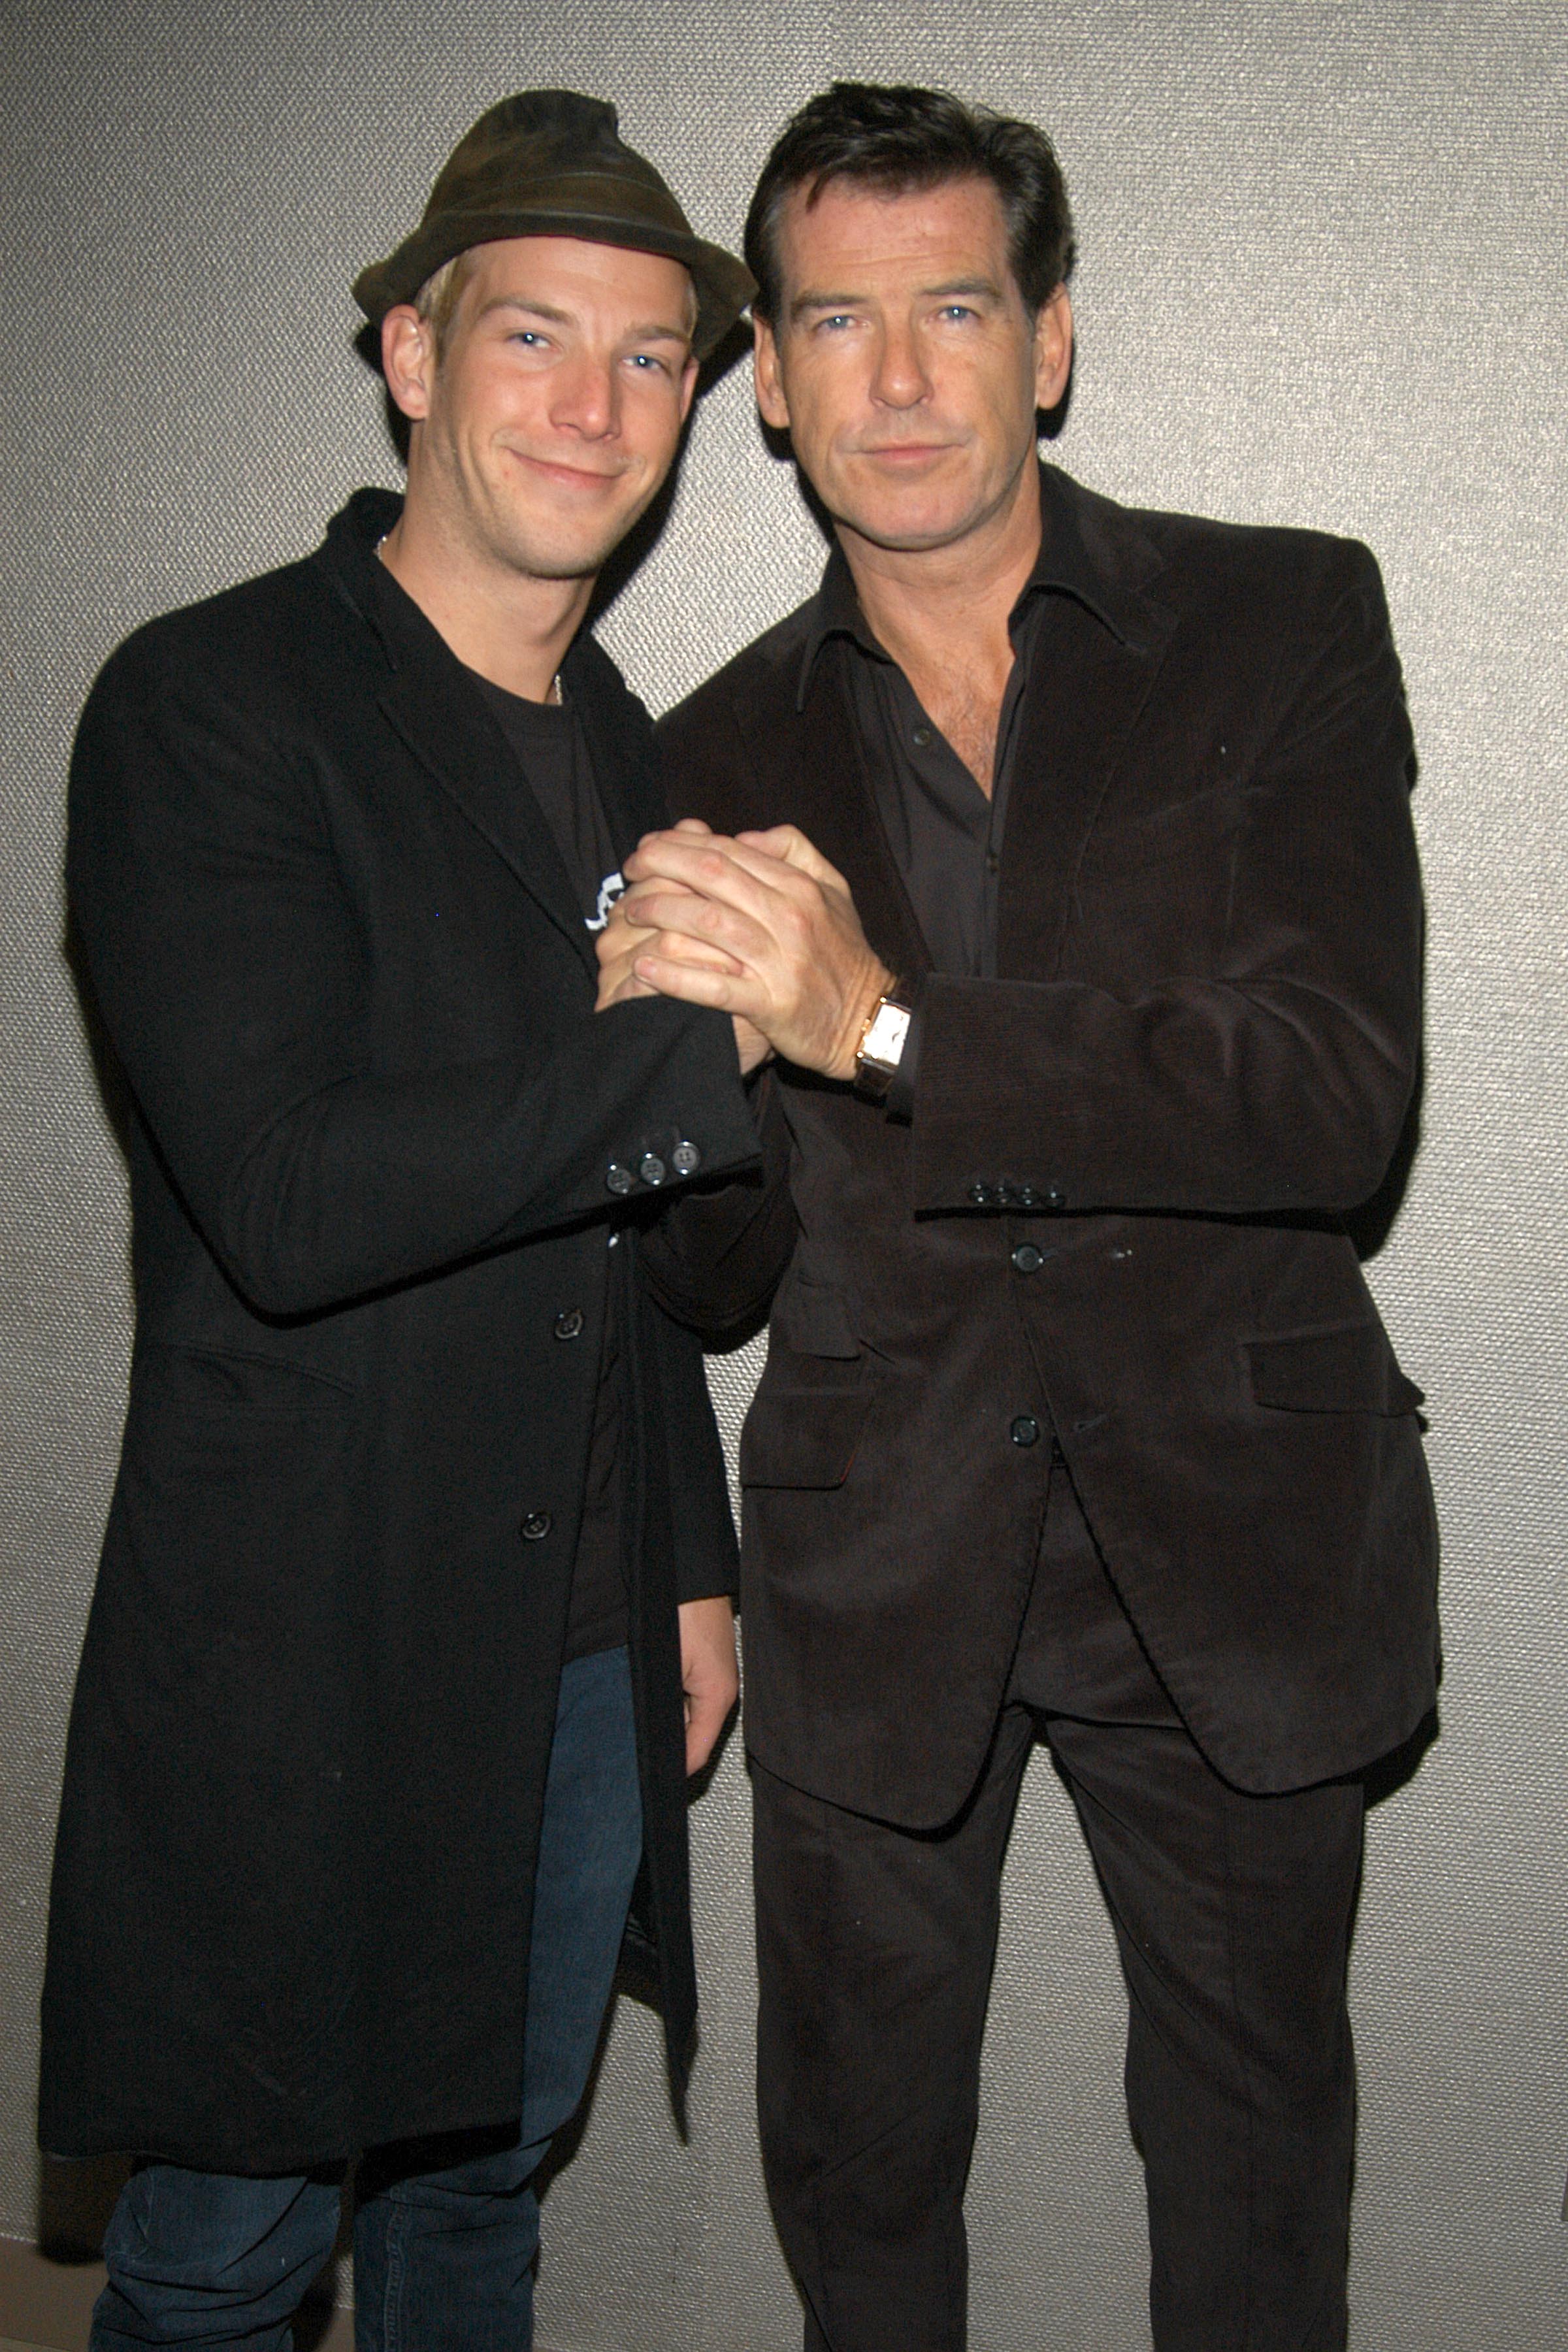 Sean Brosnan and Pierce Brosnan attend THE CINEMA SOCIETY After-Party for SERAPHIM FALLS at Soho Grand Penthouse on January 23, 2007  | Source: Getty Images